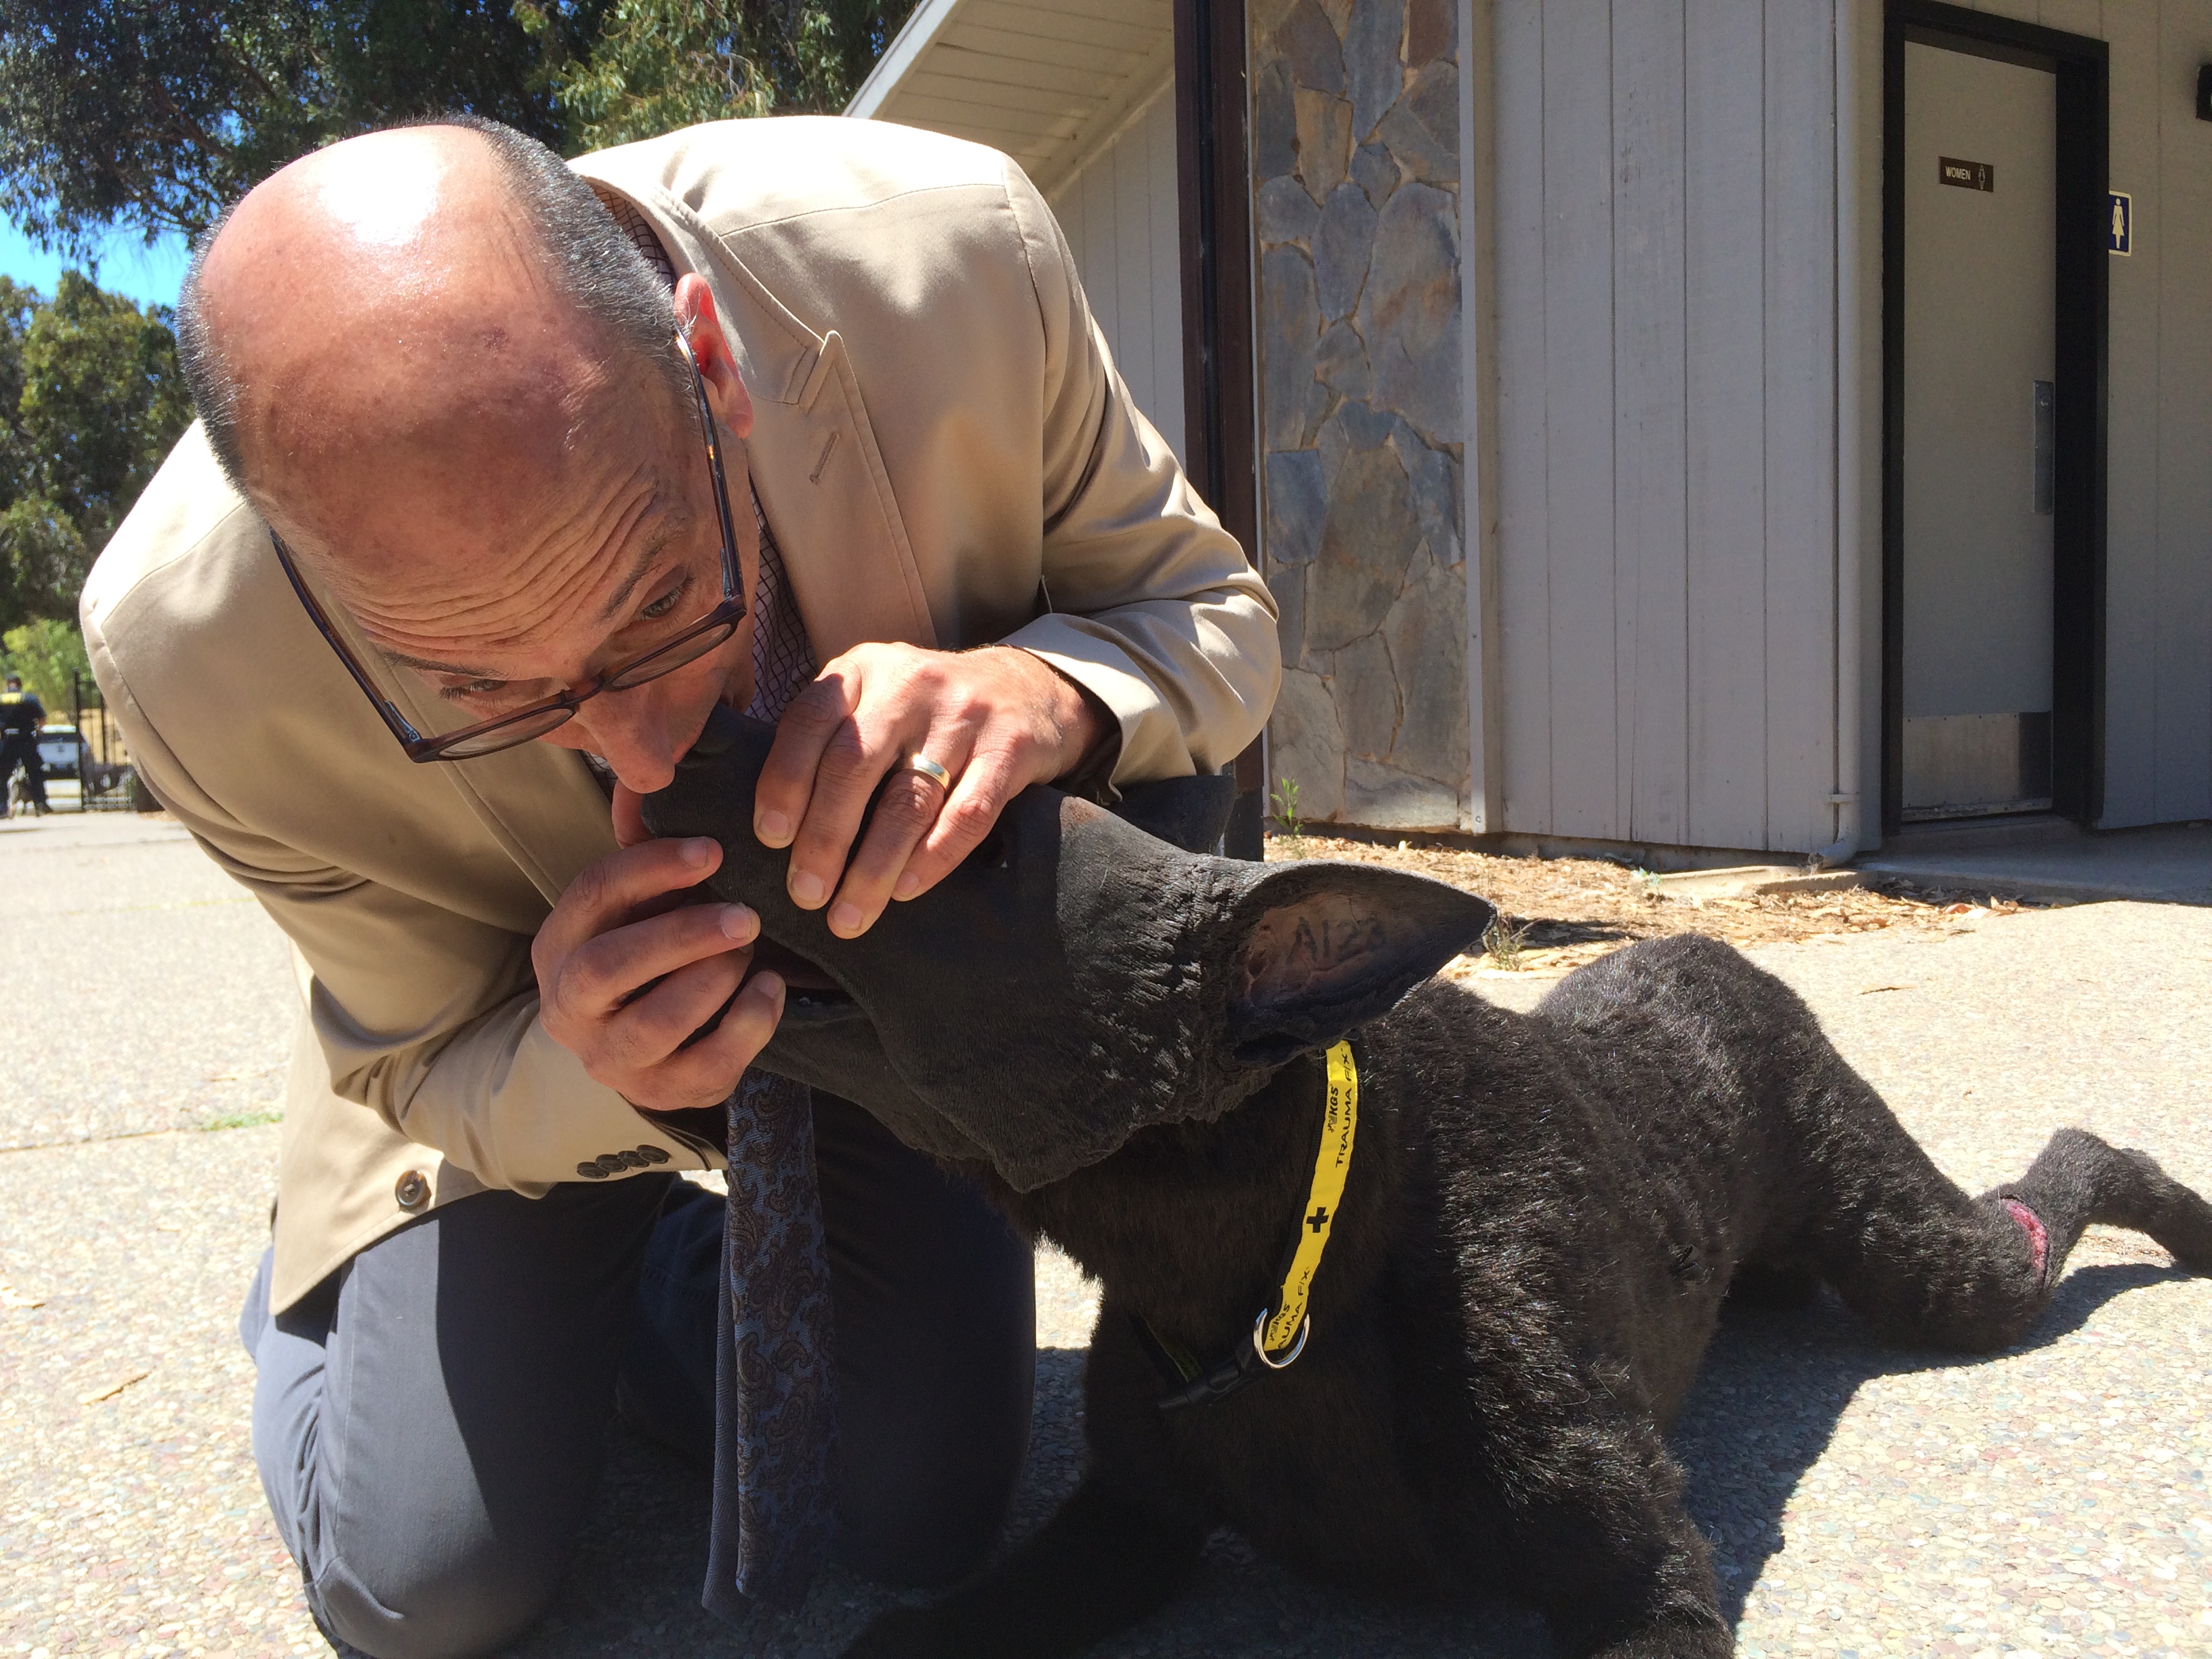 Reporter Mike Sugerman practices CPR on "Hero," a lifelike Belgian Malinois model dog. (CBS)